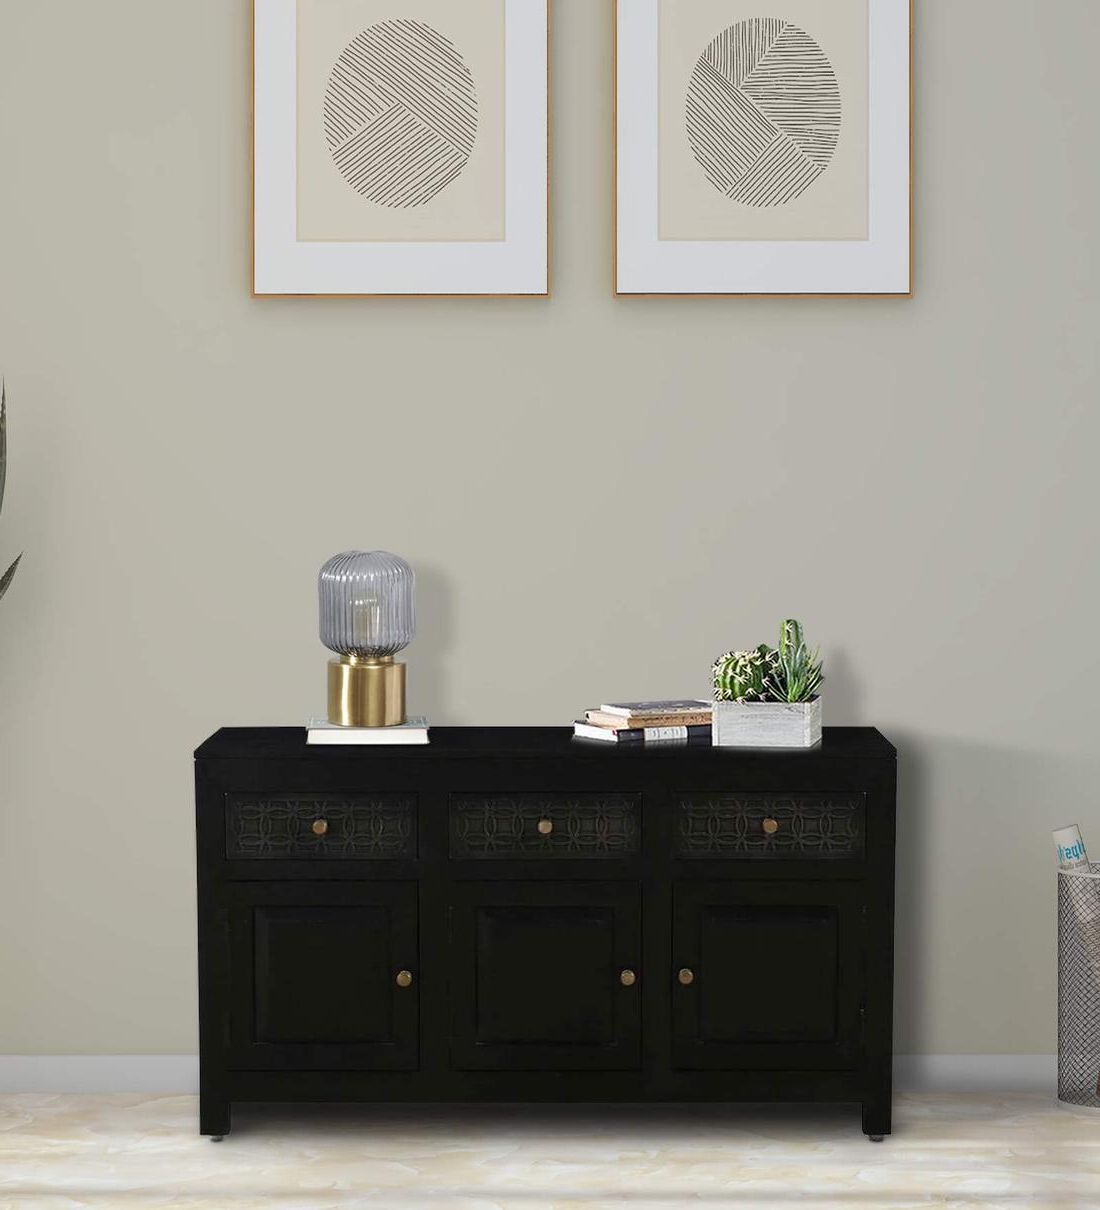 Buy Kawung Solid Wood Sideboard In Scratch Resistant Ebony Finish With 3  Doors At 10% Offwoodsworth From Pepperfry | Pepperfry Intended For Sideboards With Breathable Mesh Doors (Gallery 10 of 20)